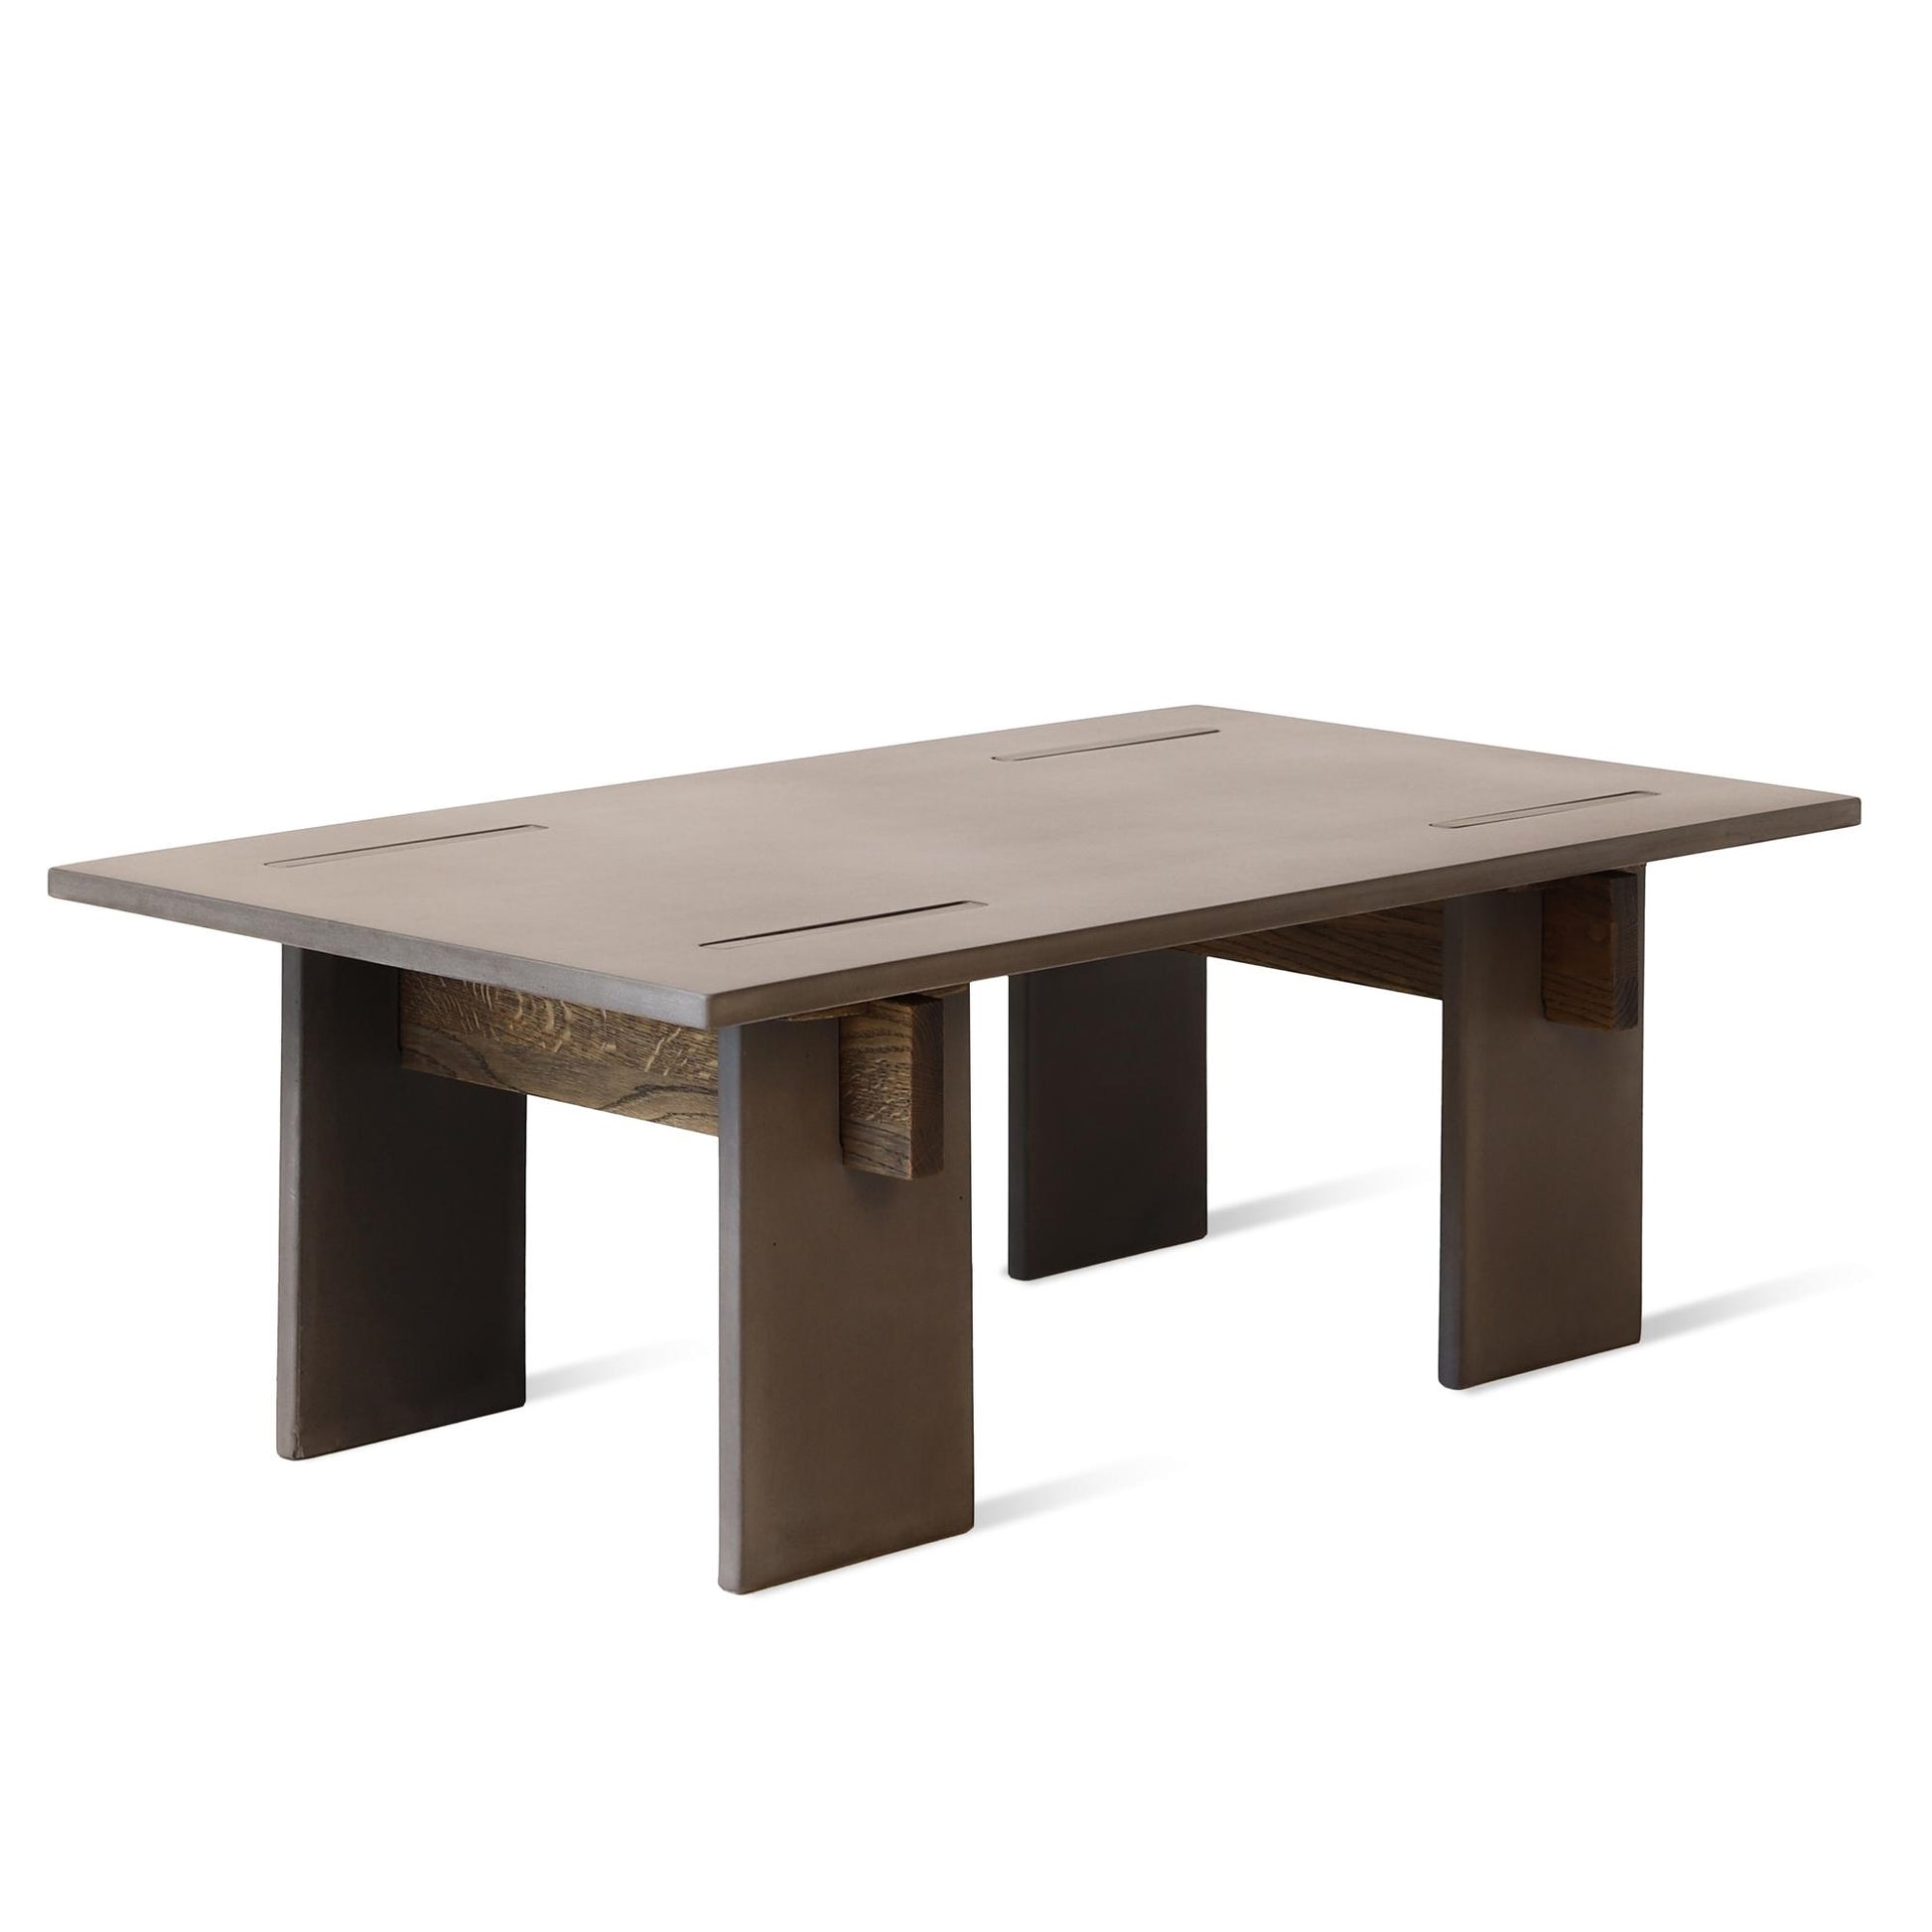 Arnold Coffee Table - Limited Edition by Eberhart #Dark concrete